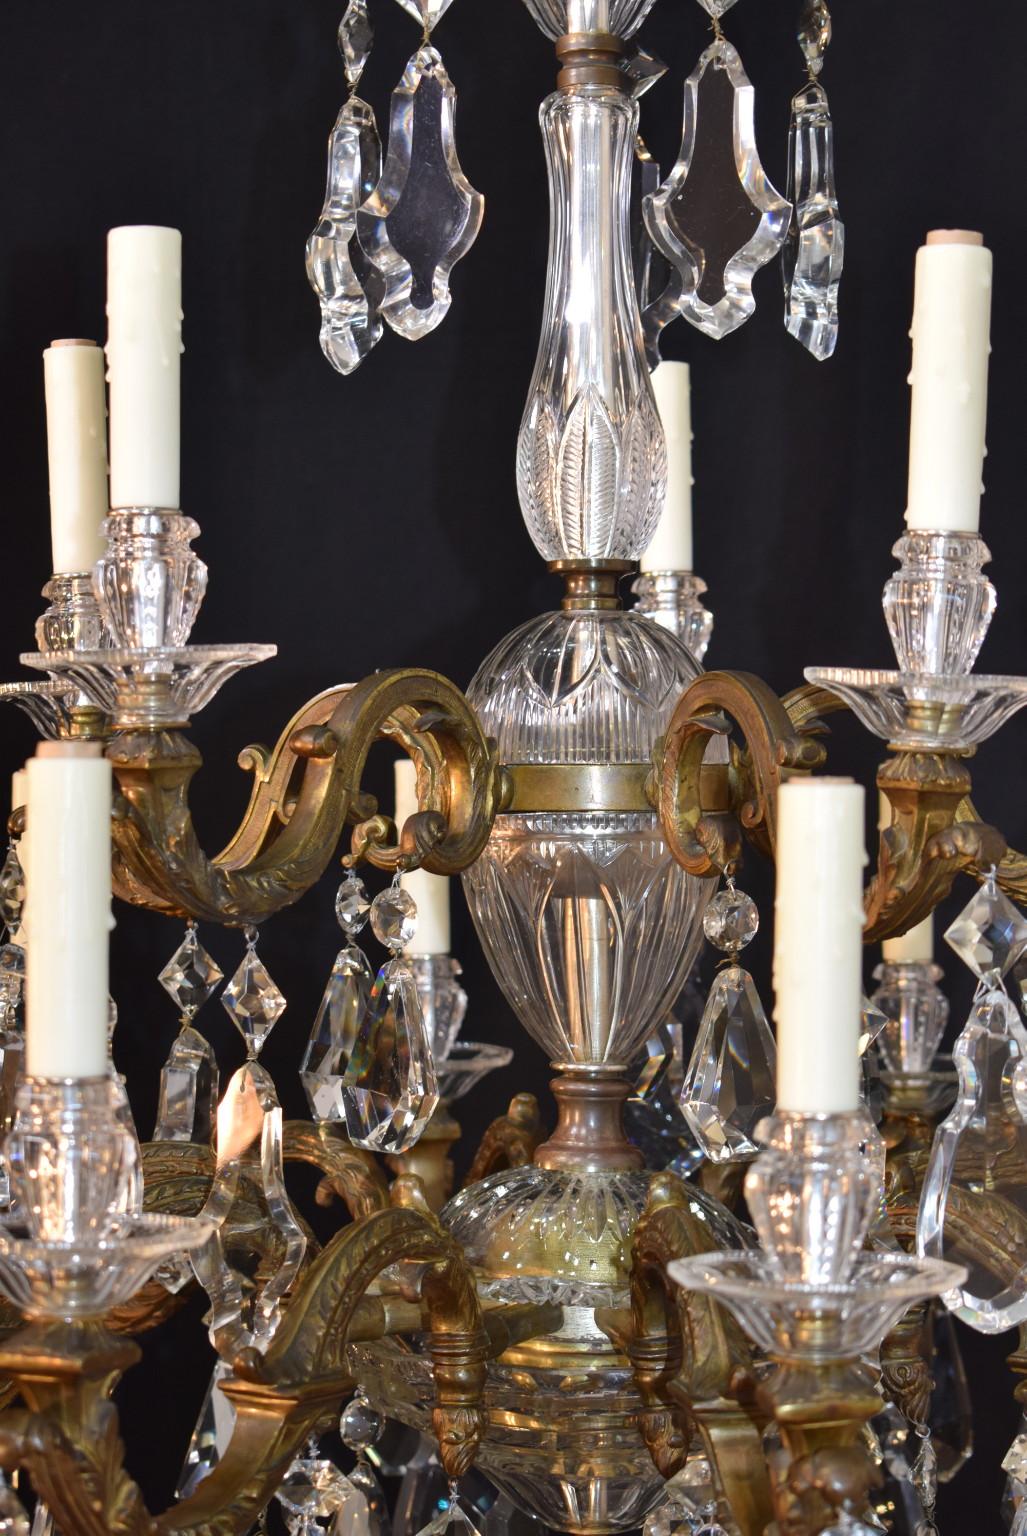 Extremely fine Edwardian bronze and crystal chandelier, featuring hand cut thick crystal pendalogues and central shaft parts. A rare find. England, circa 1900.
Dimensins: Height 42